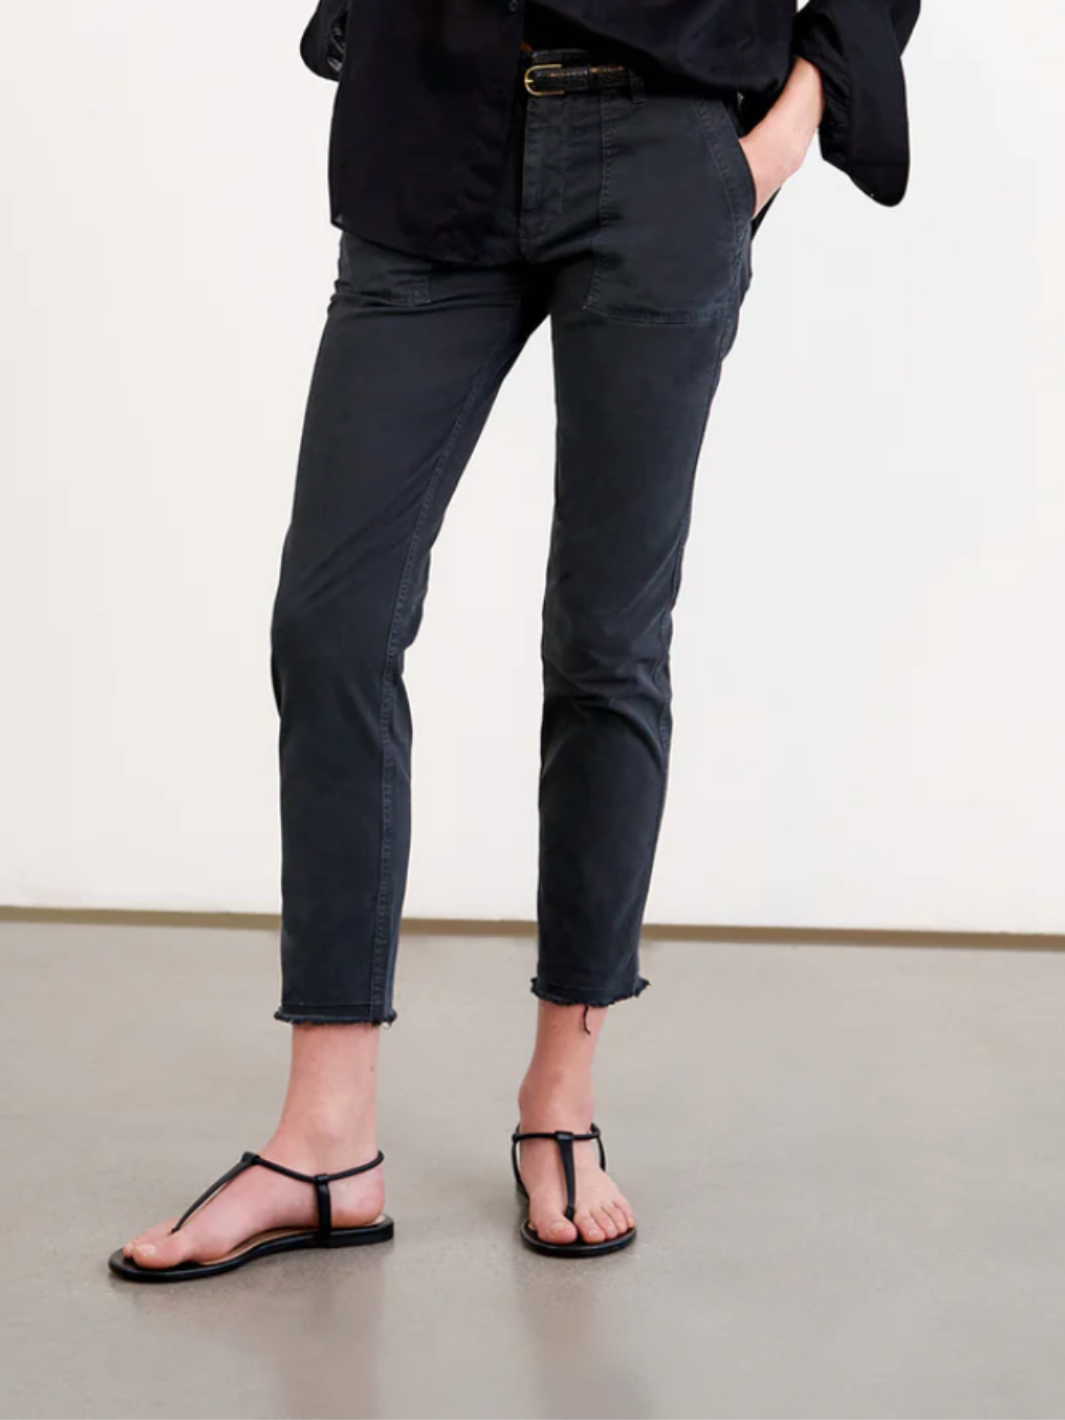 JENNA PANT IN CARBON - Romi Boutique